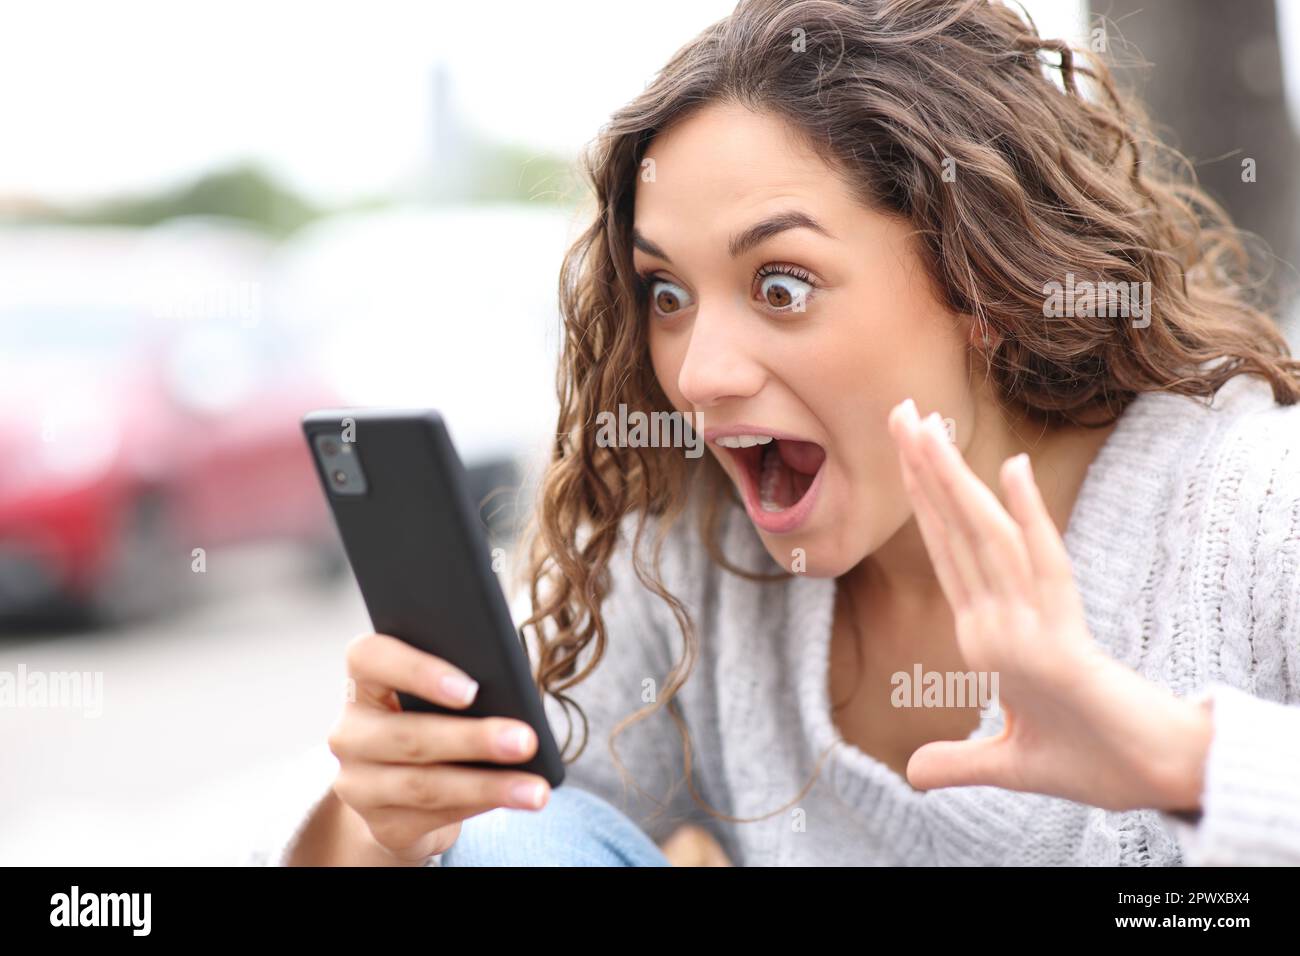 surprised-woman-checking-smart-phone-content-in-the-street-2PWXBX4.jpg